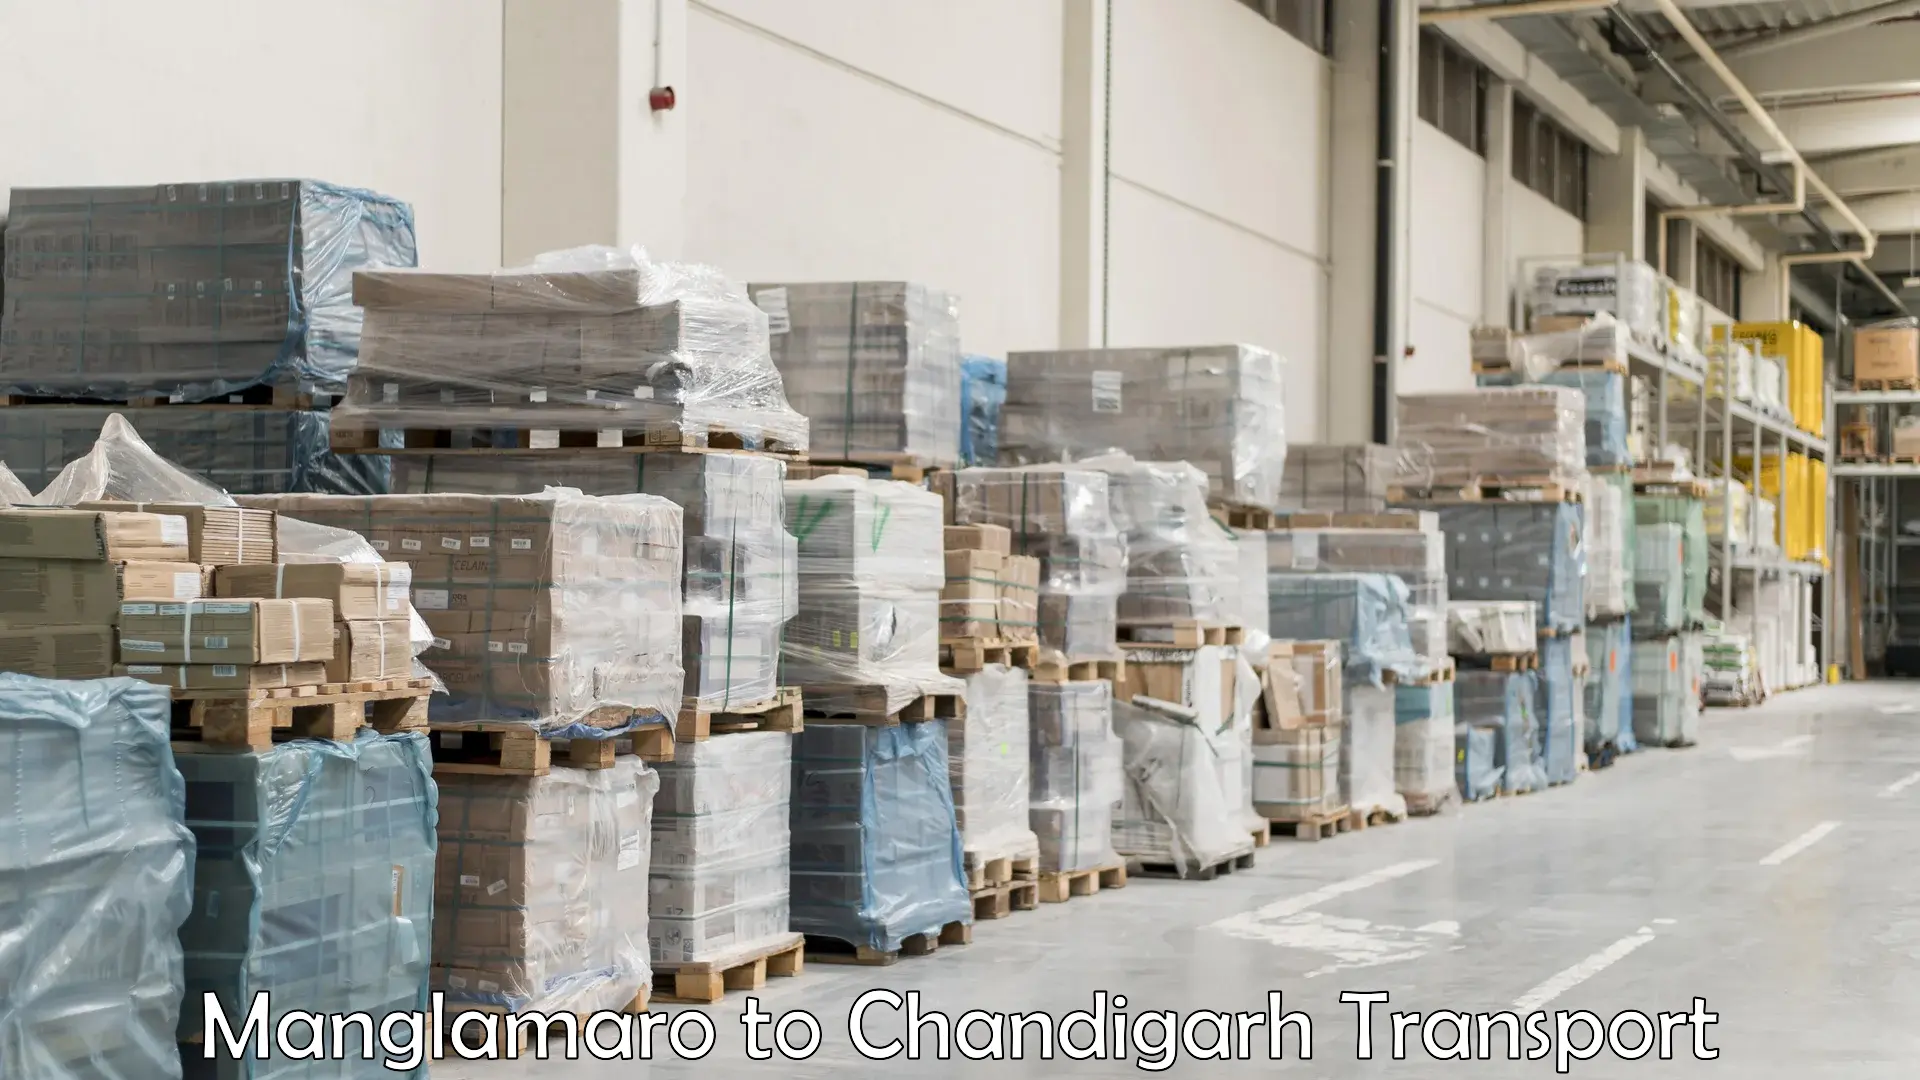 Parcel transport services in Manglamaro to Chandigarh